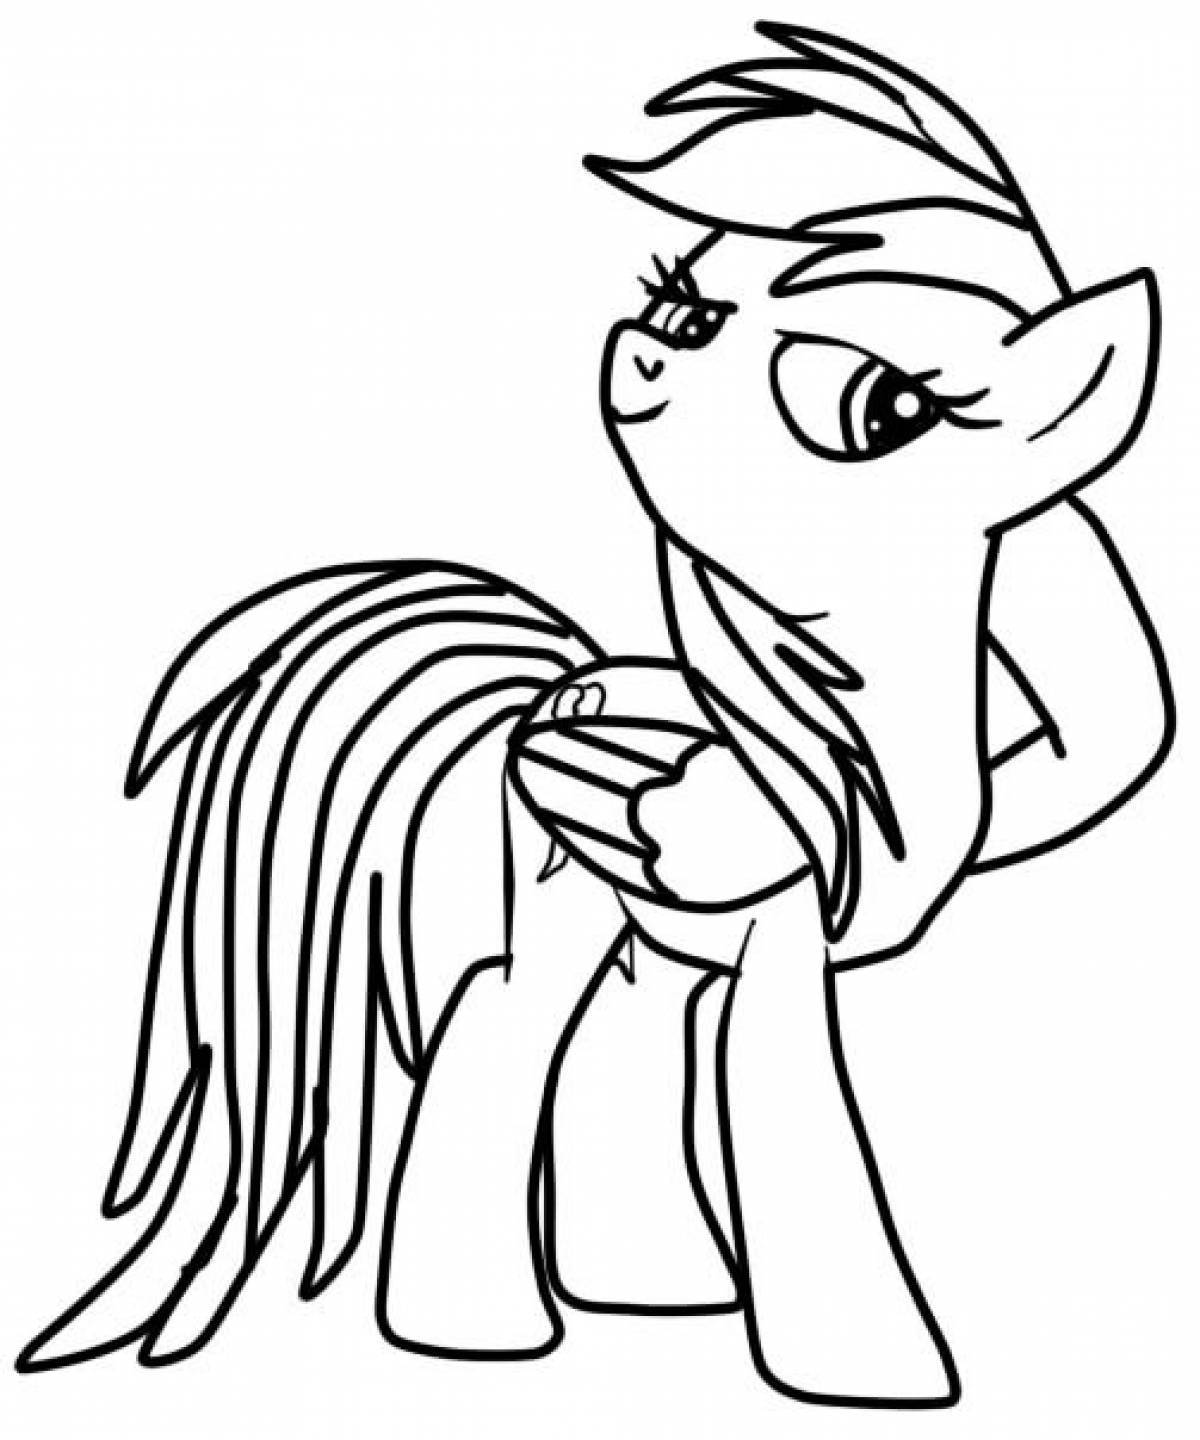 Pony coloring pages to print